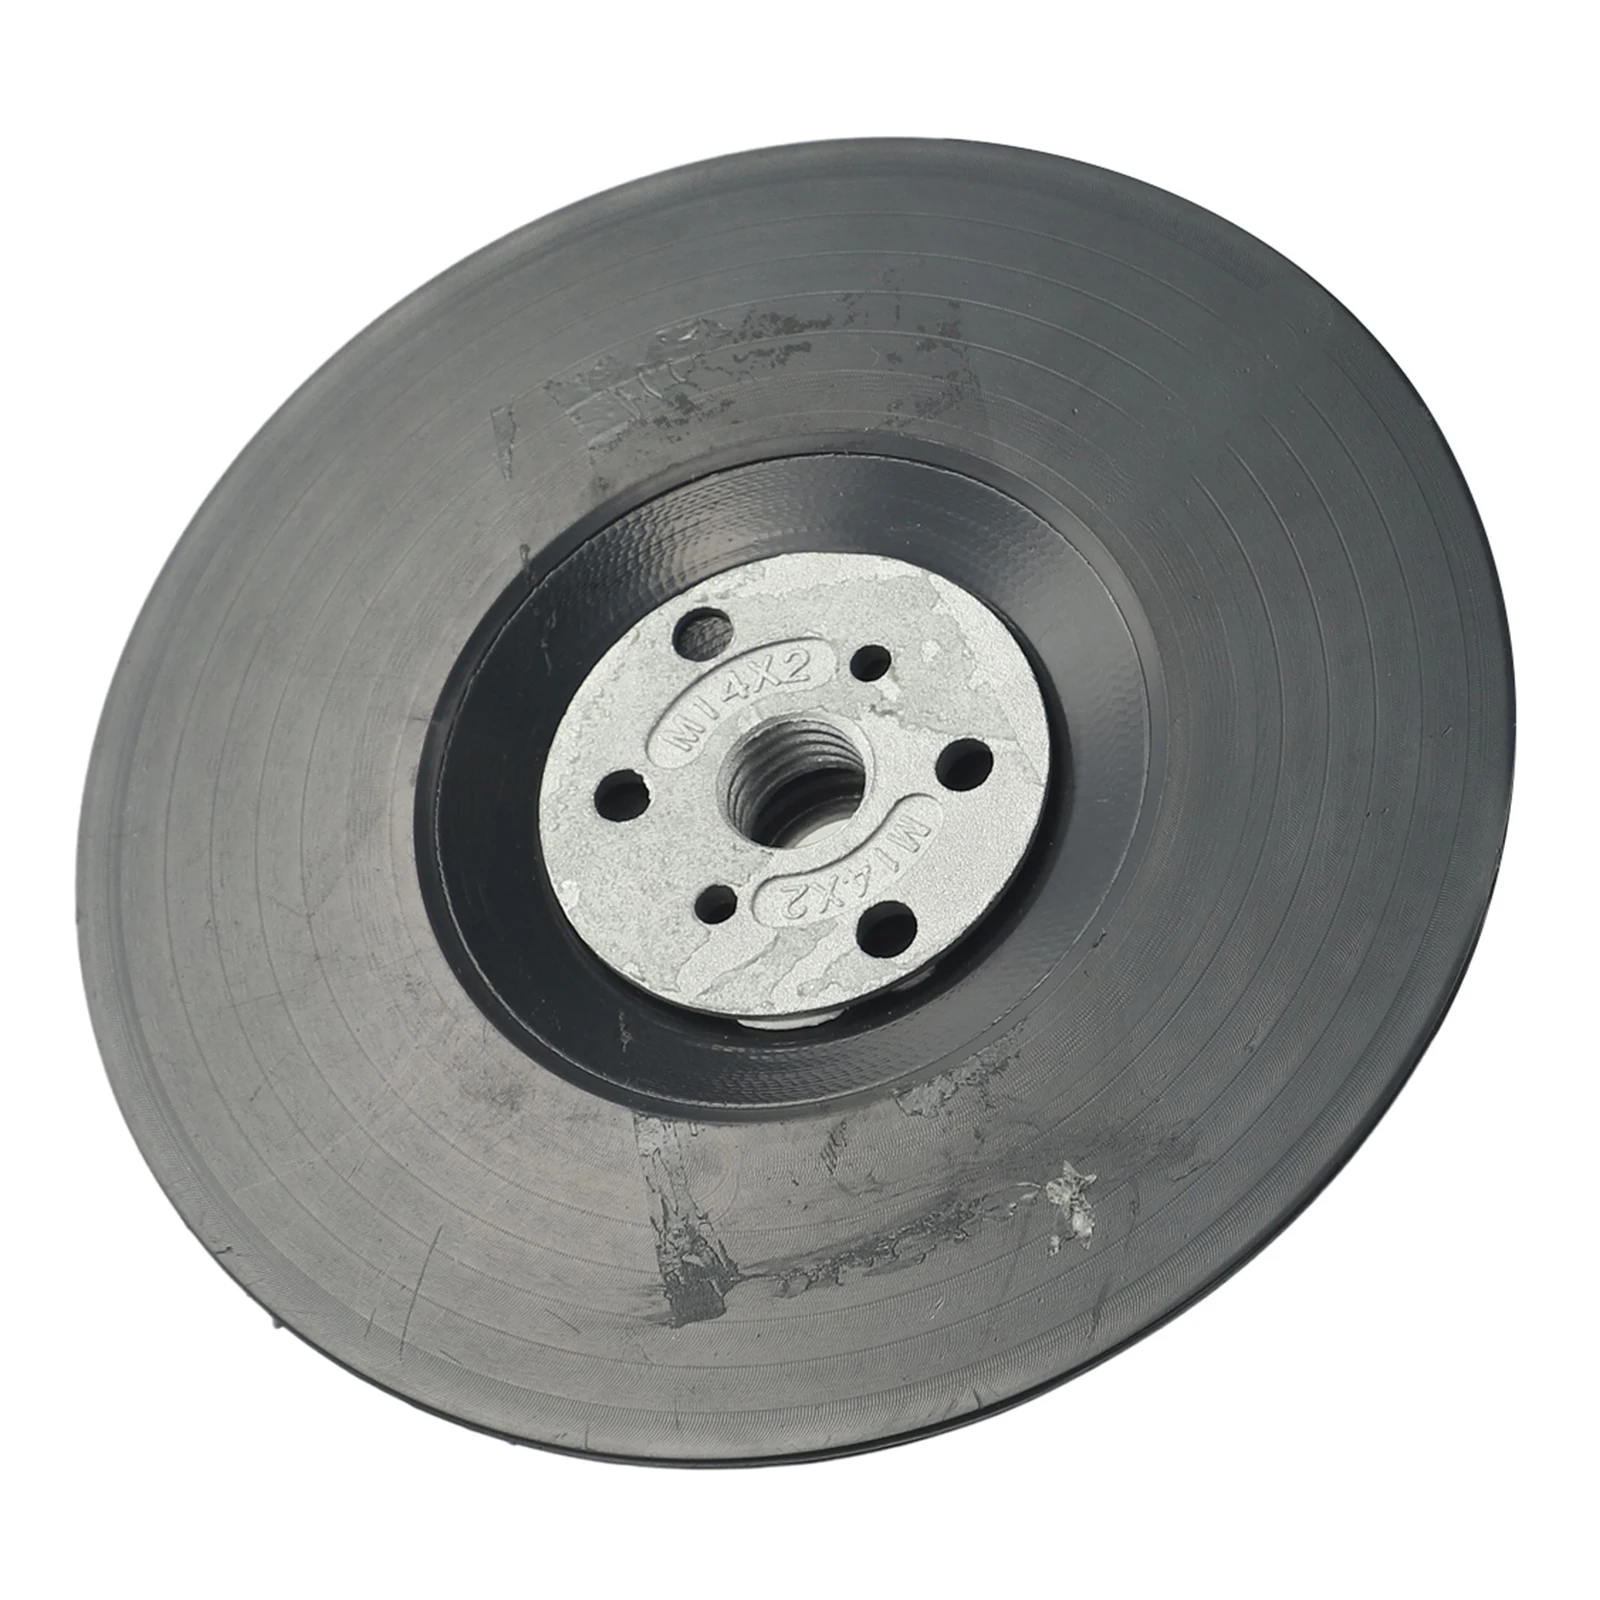 

5ich 125mm Backing Pad Disc Backing Pad Tool 125mm Resin Fiber With Lock Nut 12200 RPM For Angle Grinder M14 Thread